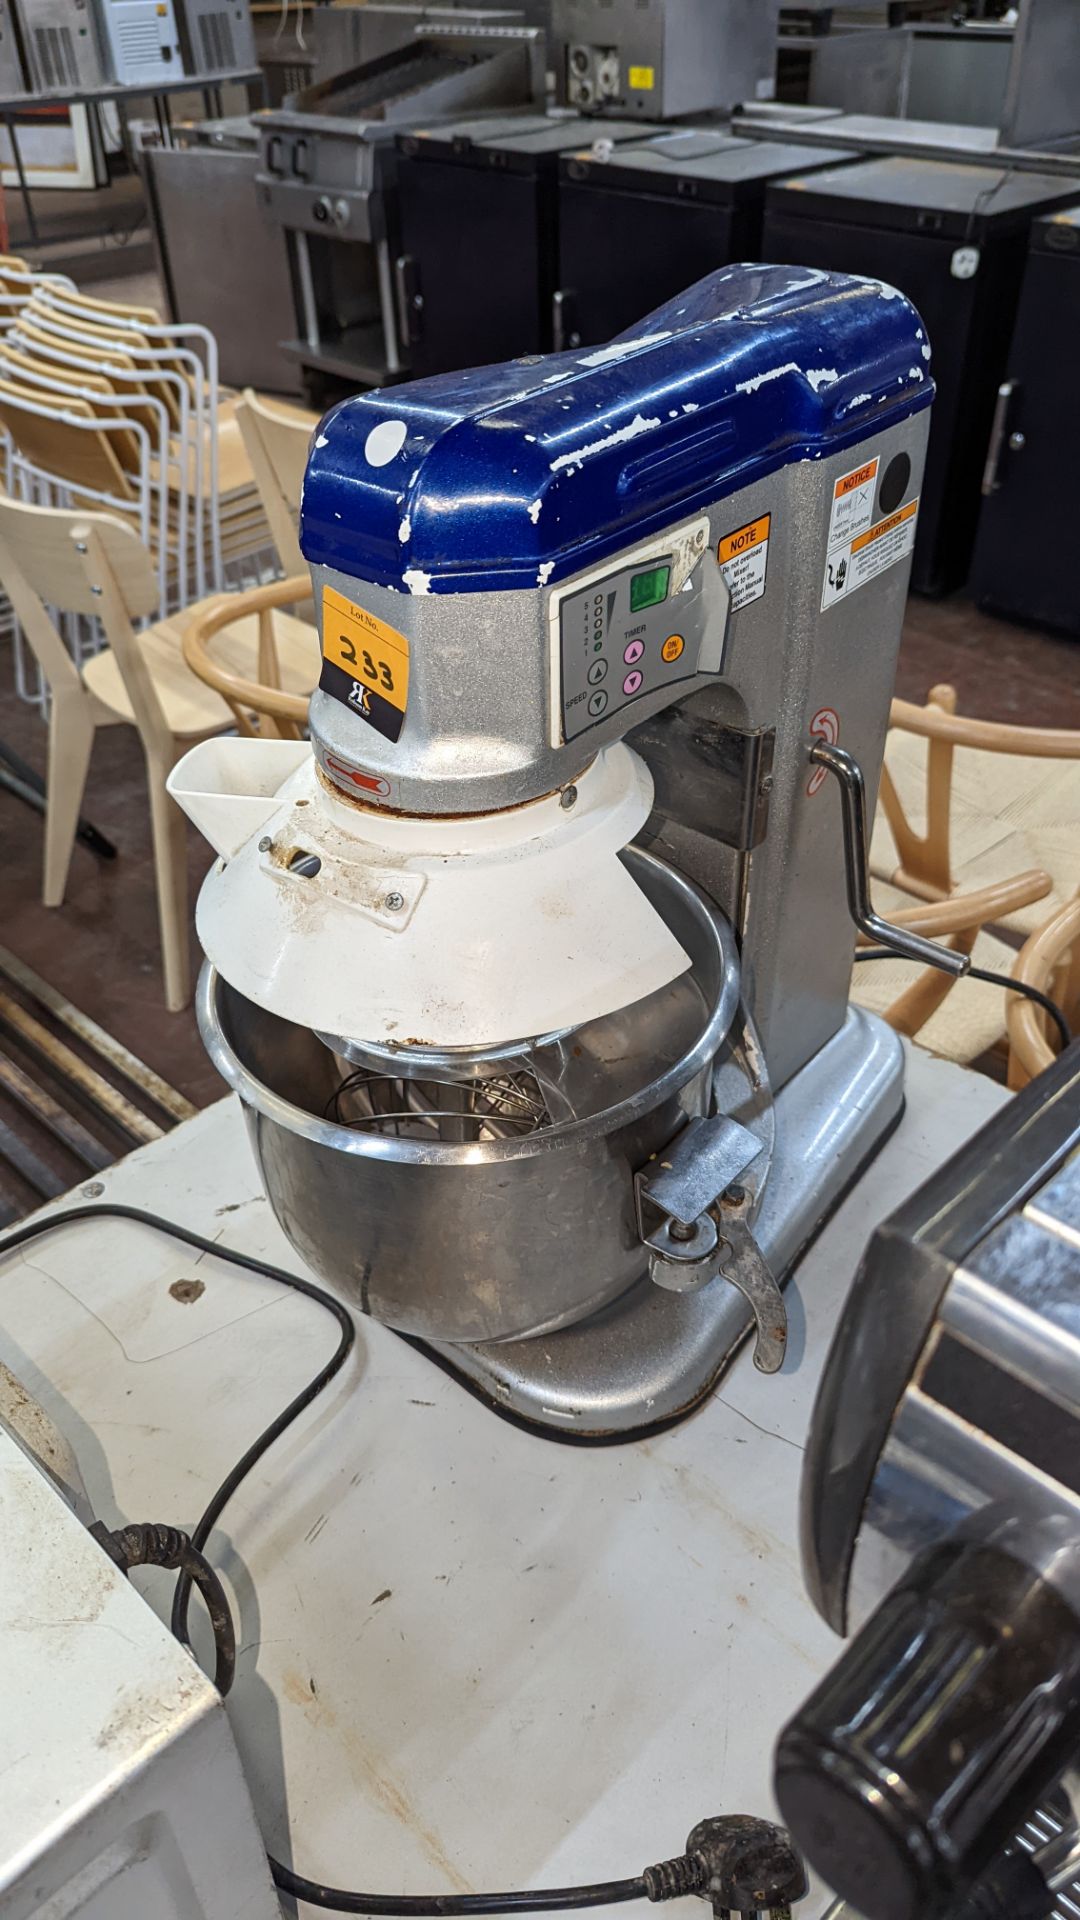 Vollrath heavy-duty mixer with removable bowl & 3 assorted attachments (whisk, paddle & hook) - Image 3 of 8